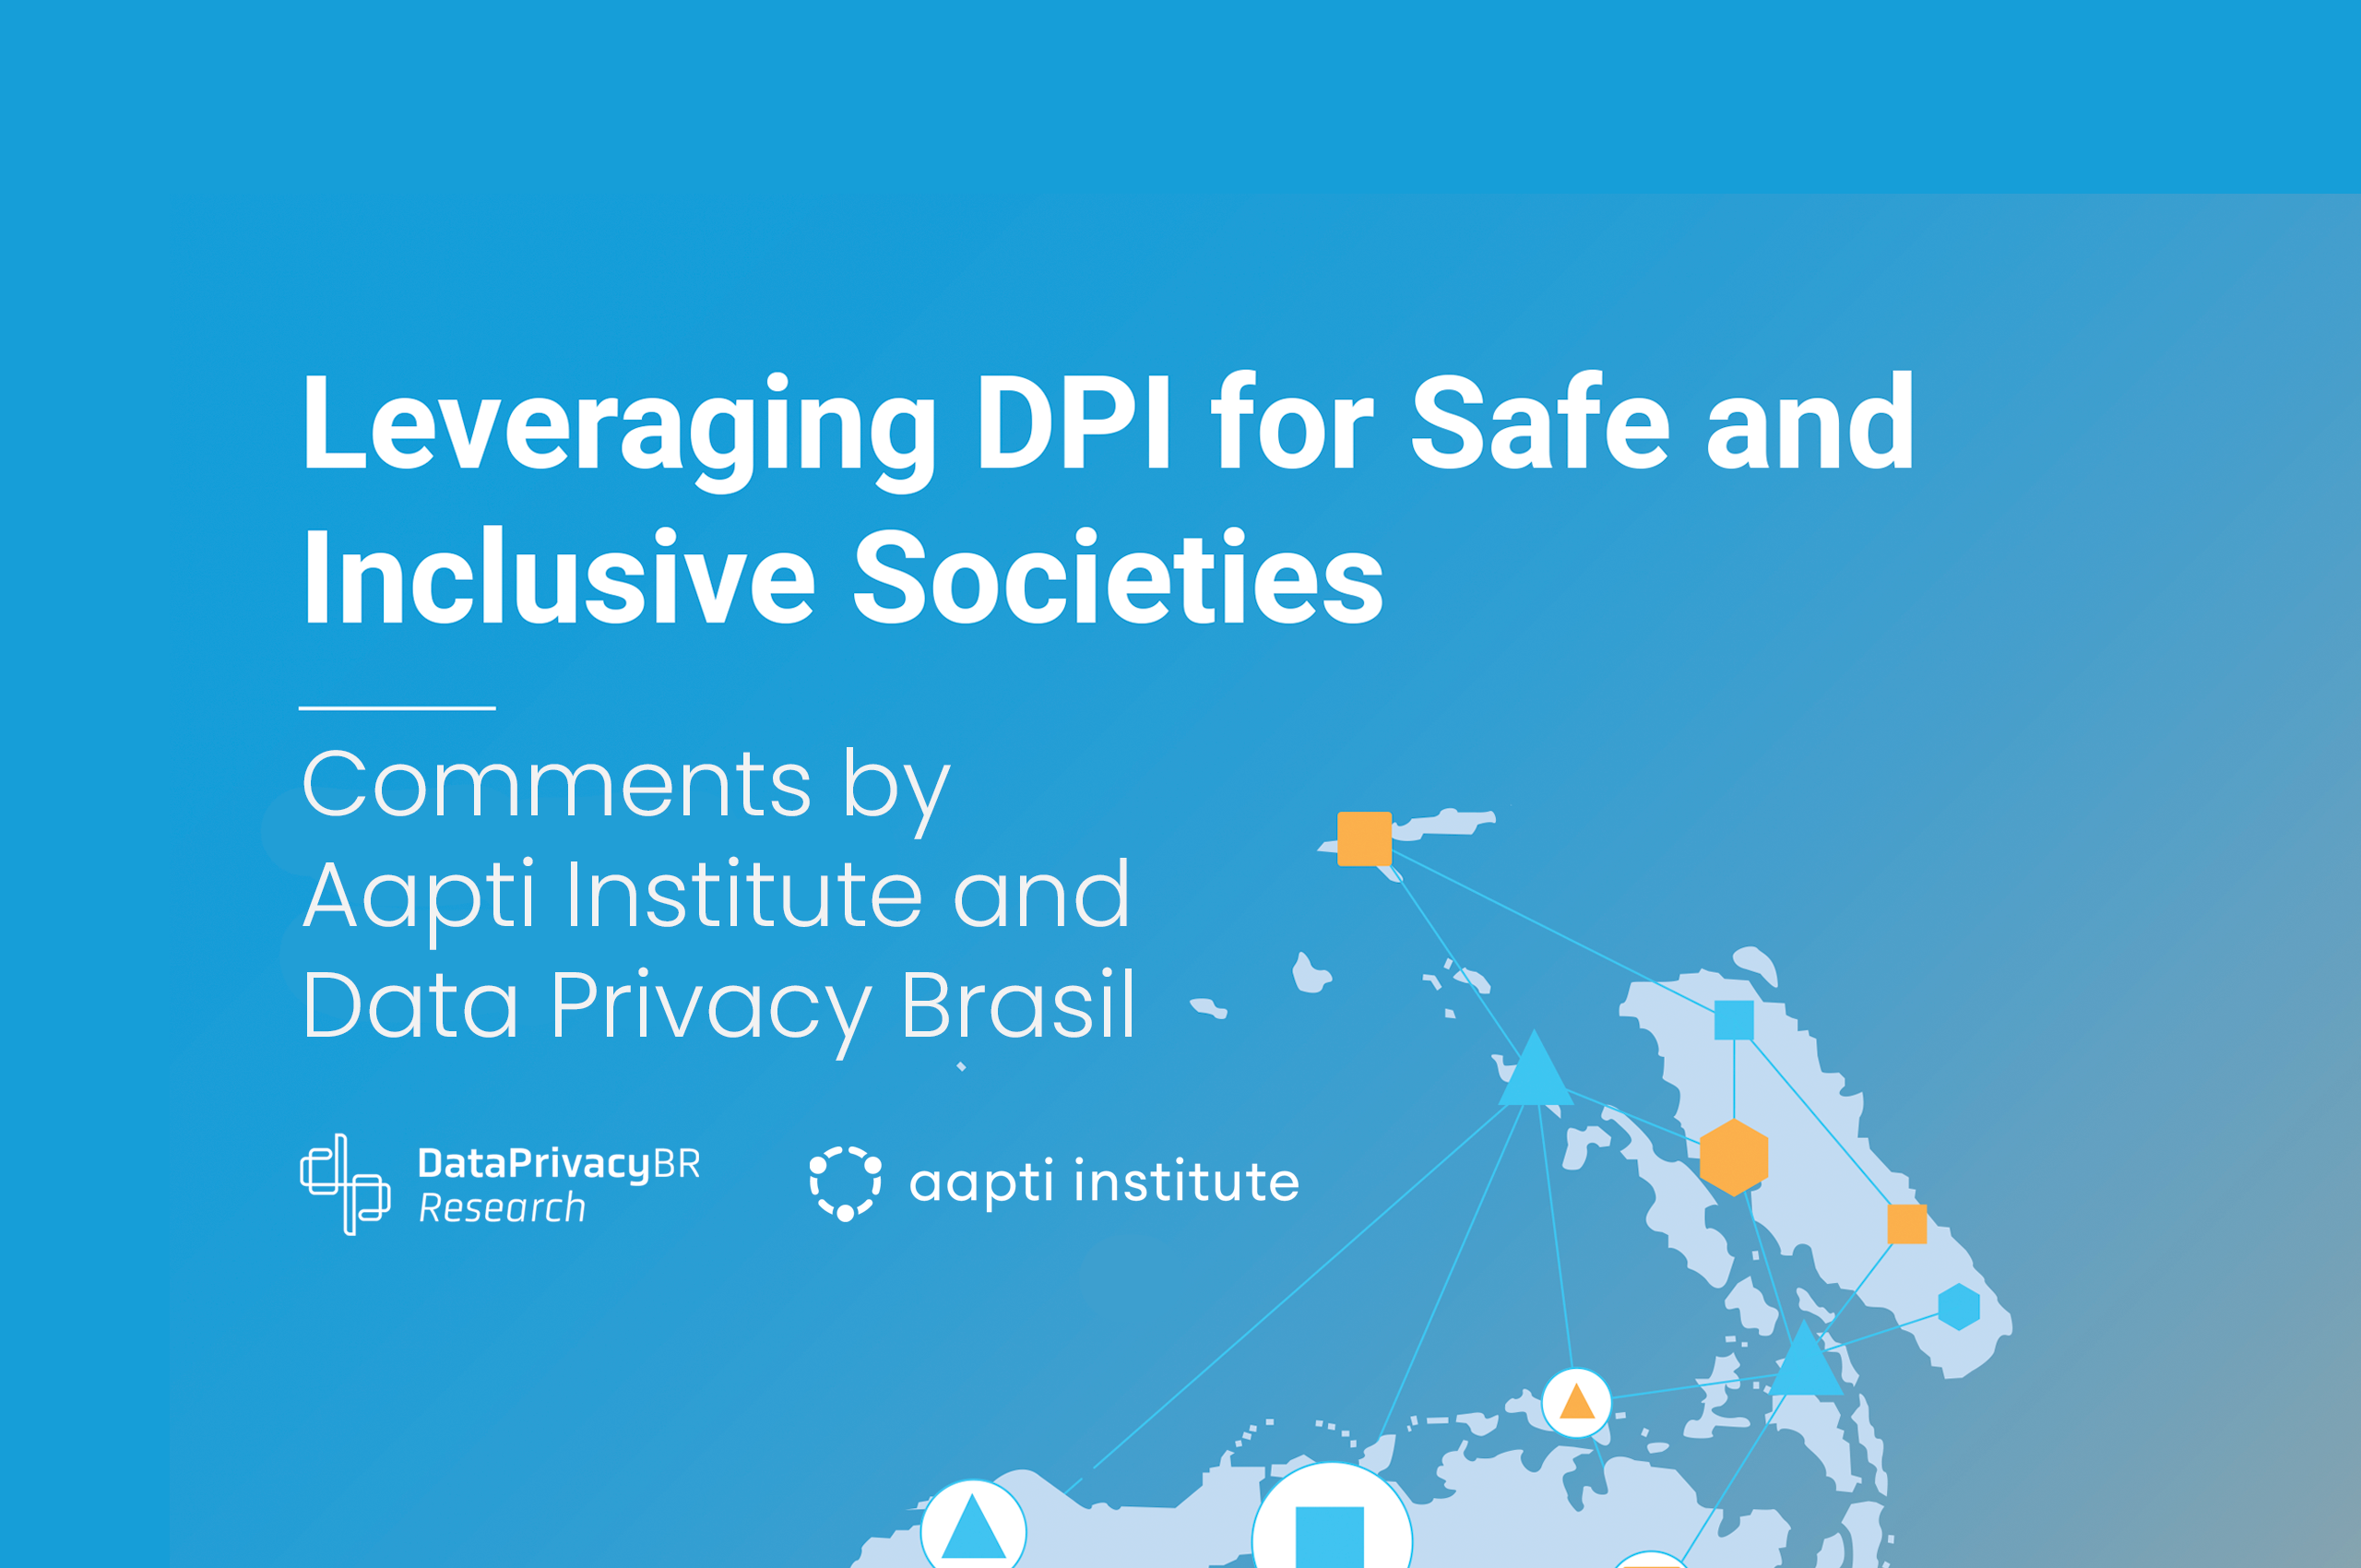 Leveraging DPI for Safe and Inclusive Societies